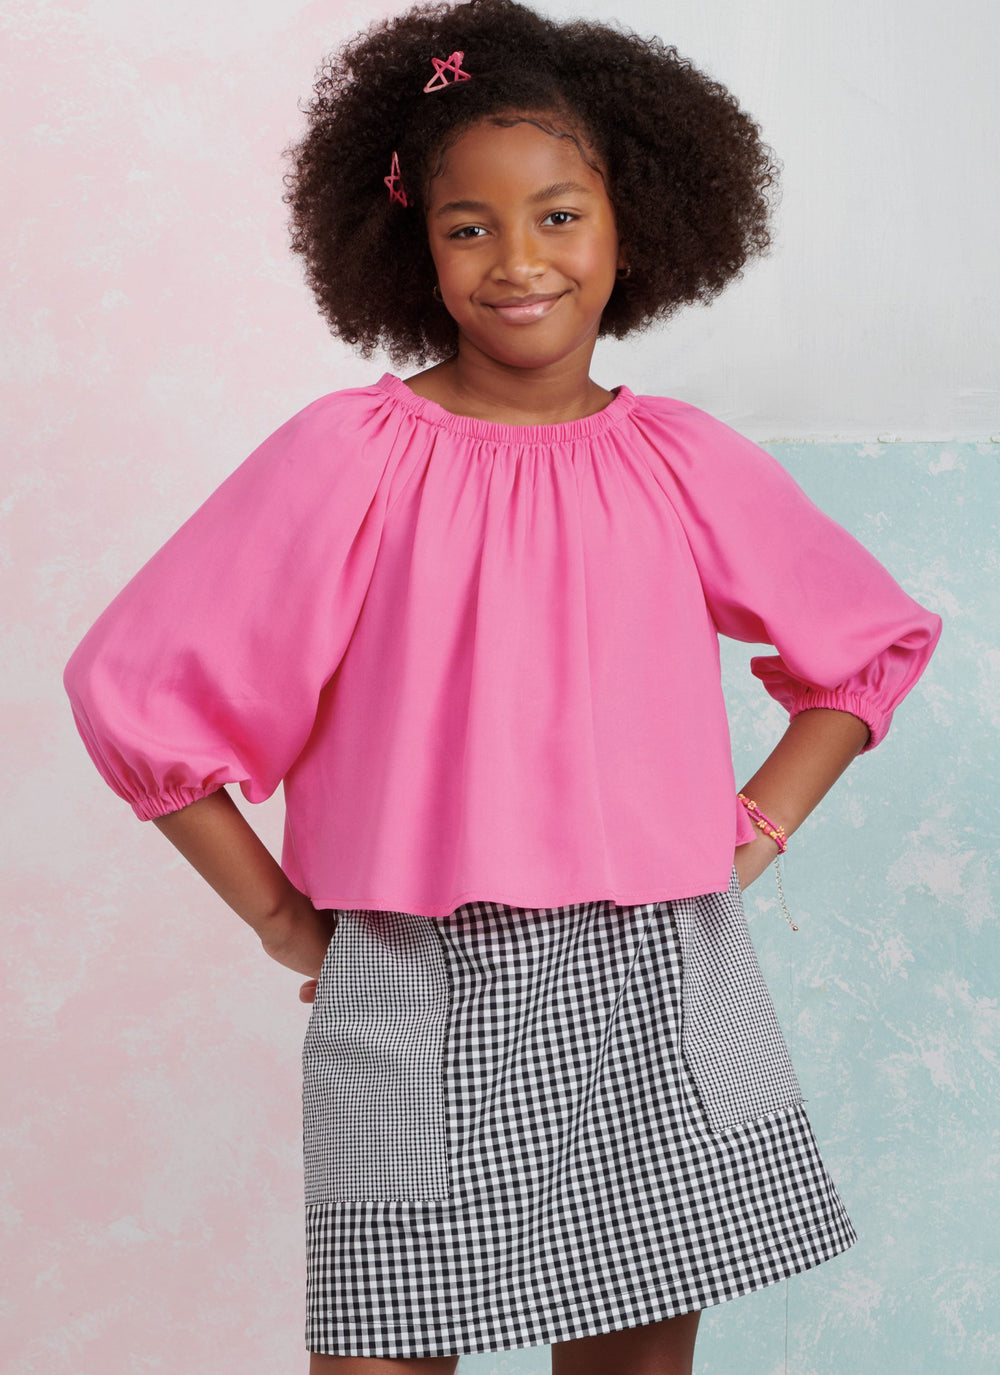 Simplicity Child/Teen Tops & Skirts S9934